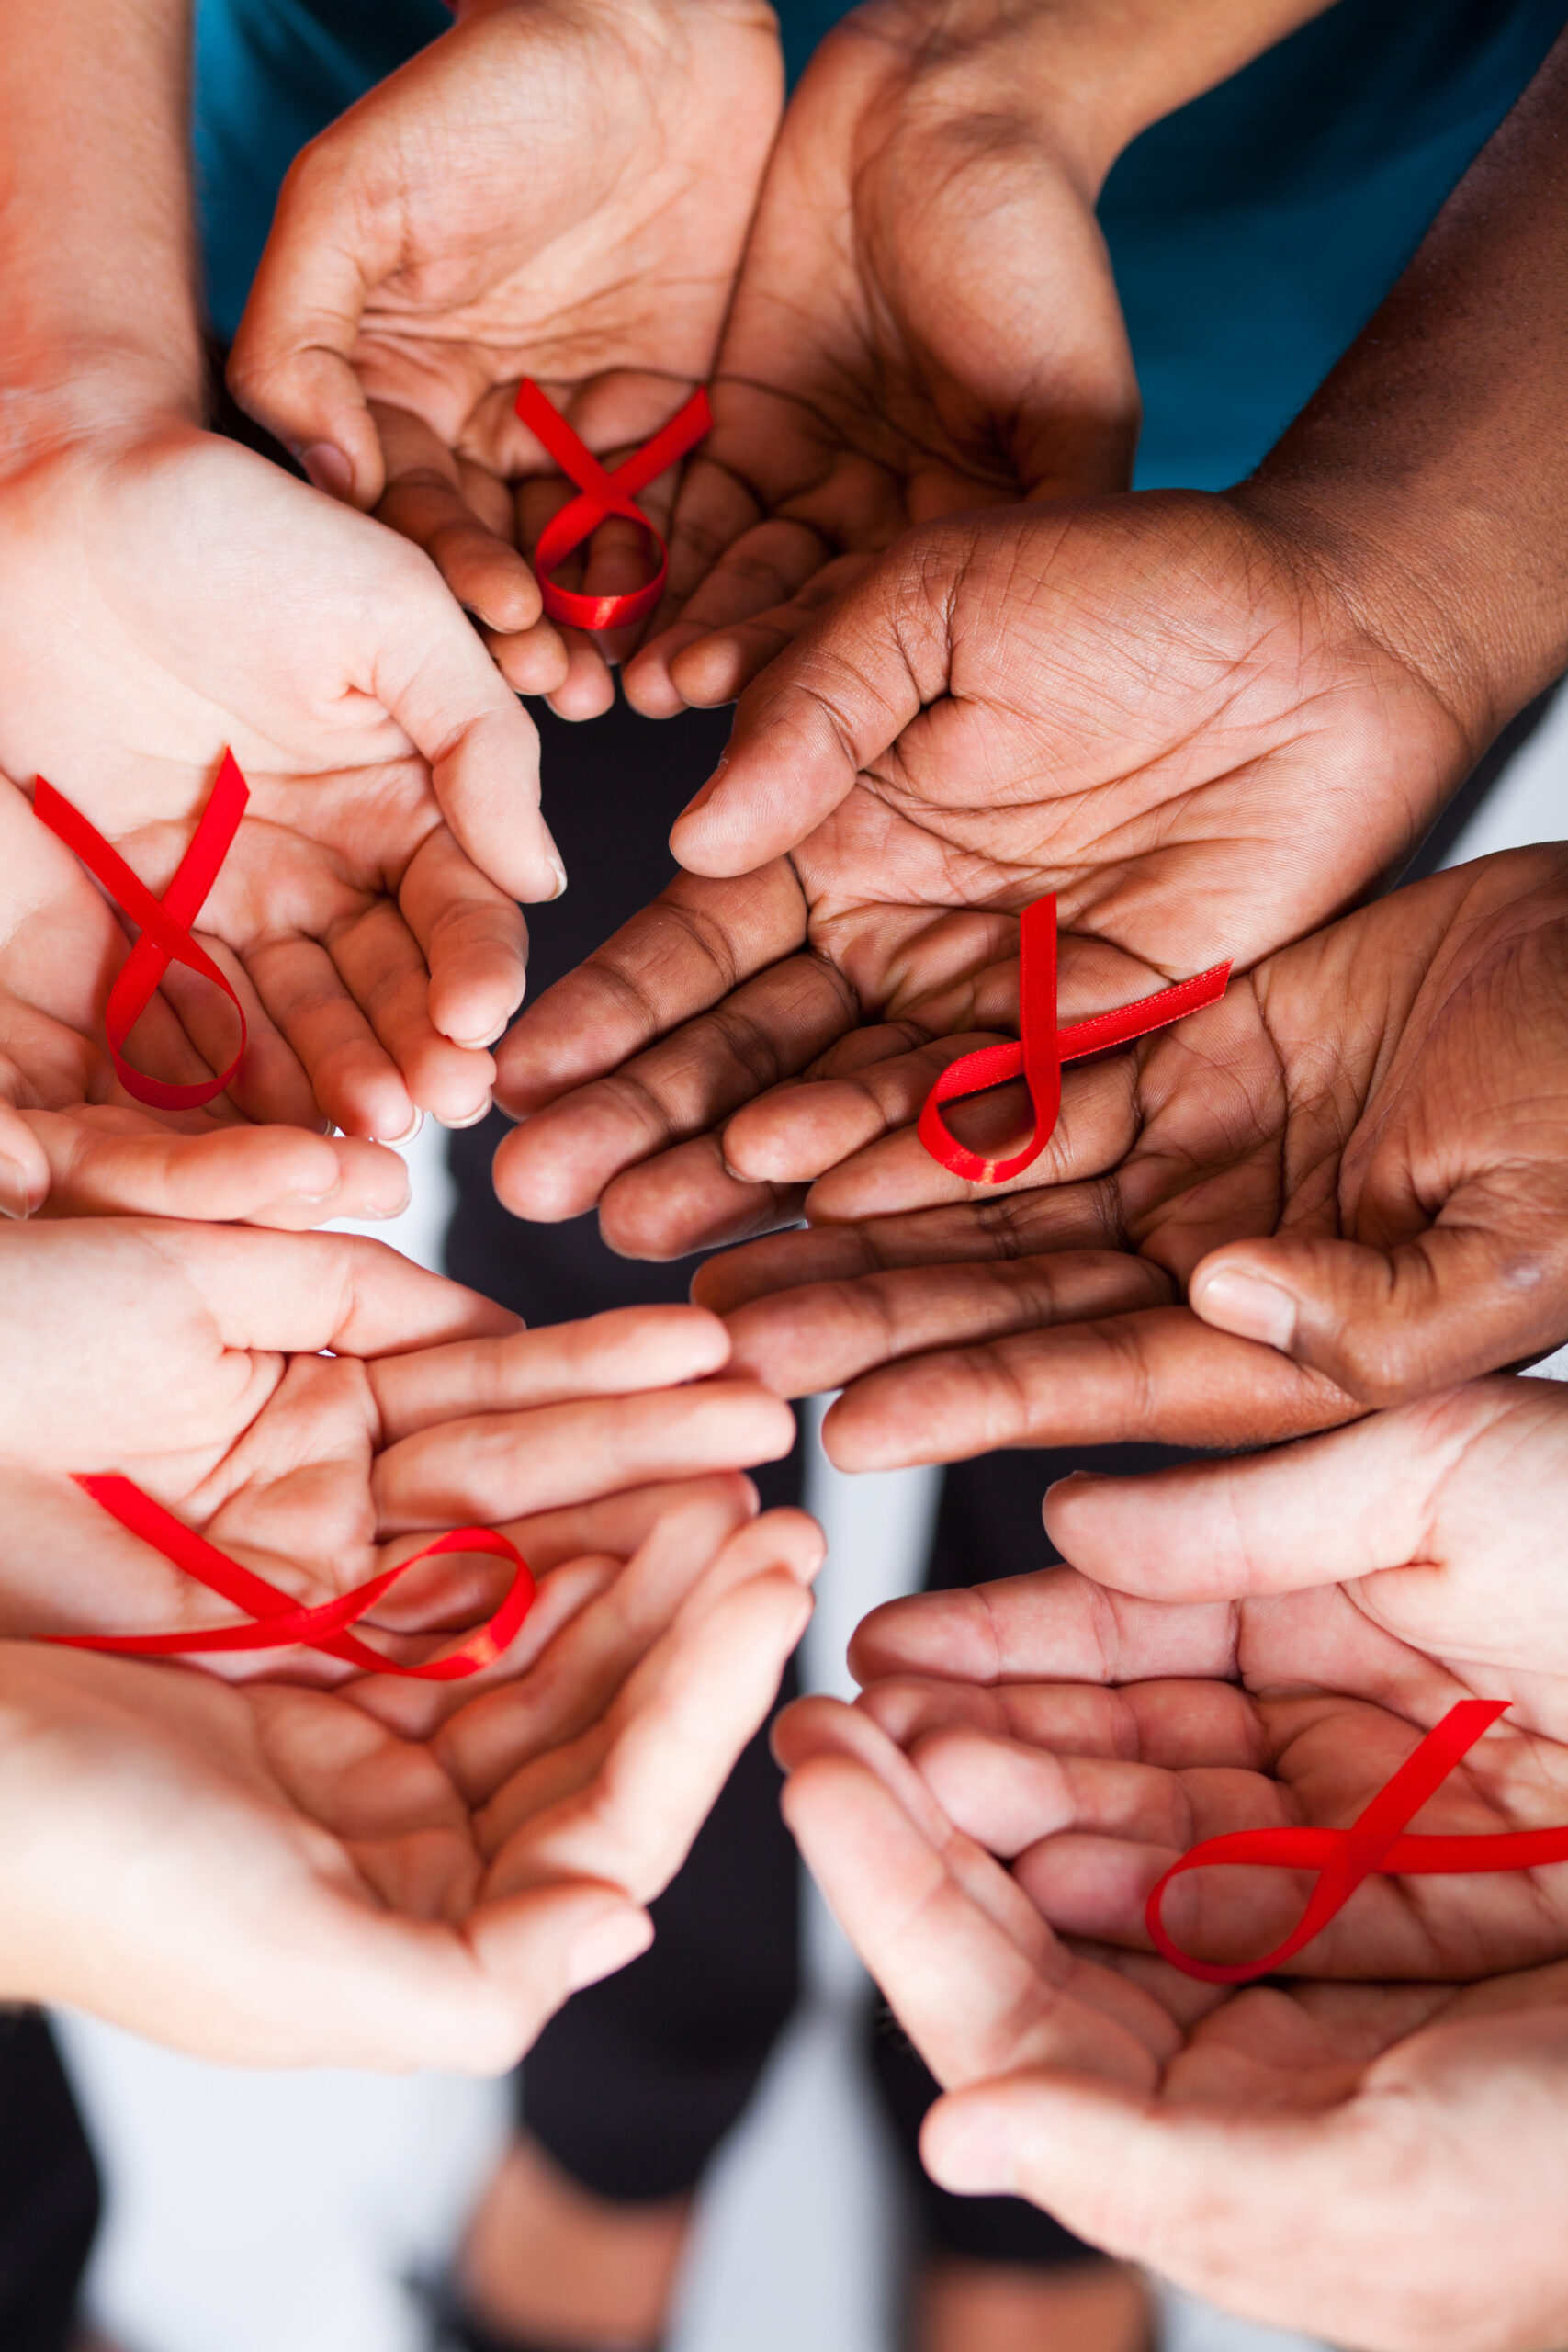 Positively Safe: Addressing the Intersection of DV and HIV/AIDS Toolkit